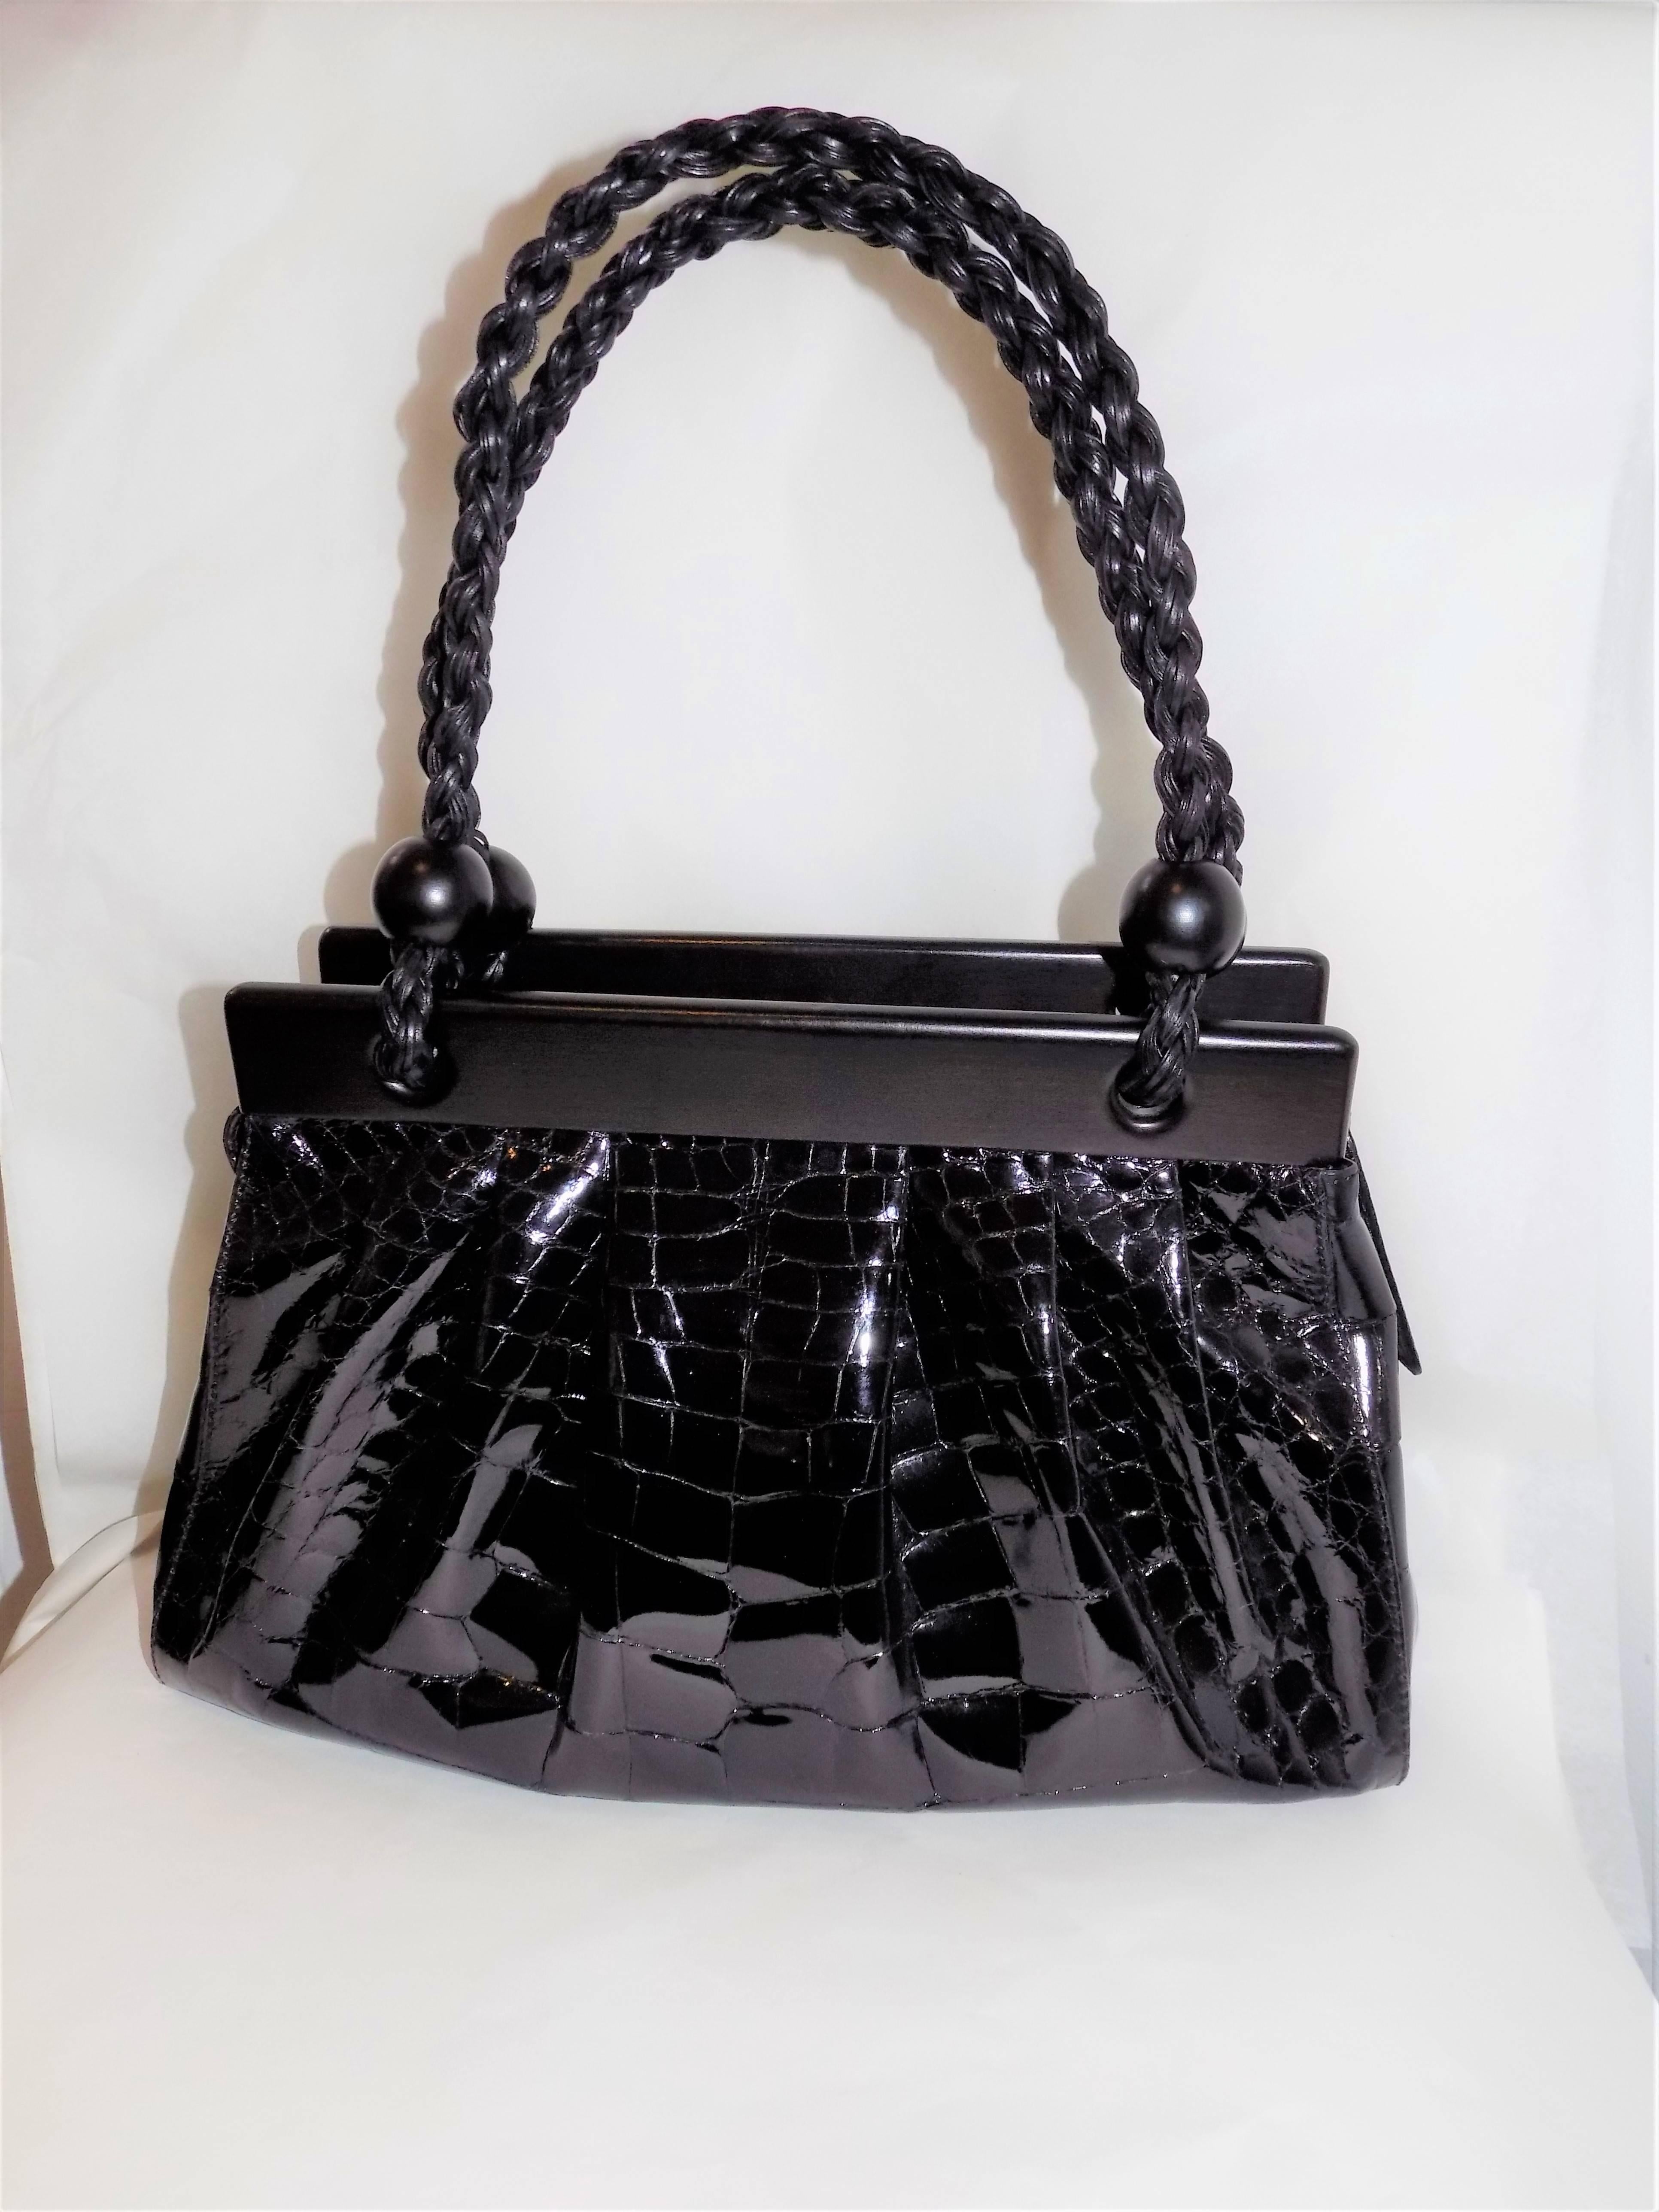 Established in 1938, Suarez has been providing quality and fashion to women from around the world for three generations. Suarez specializes in the finest handbags, belts, and accessories in a variety of luxurious leathers and exotic skins. The